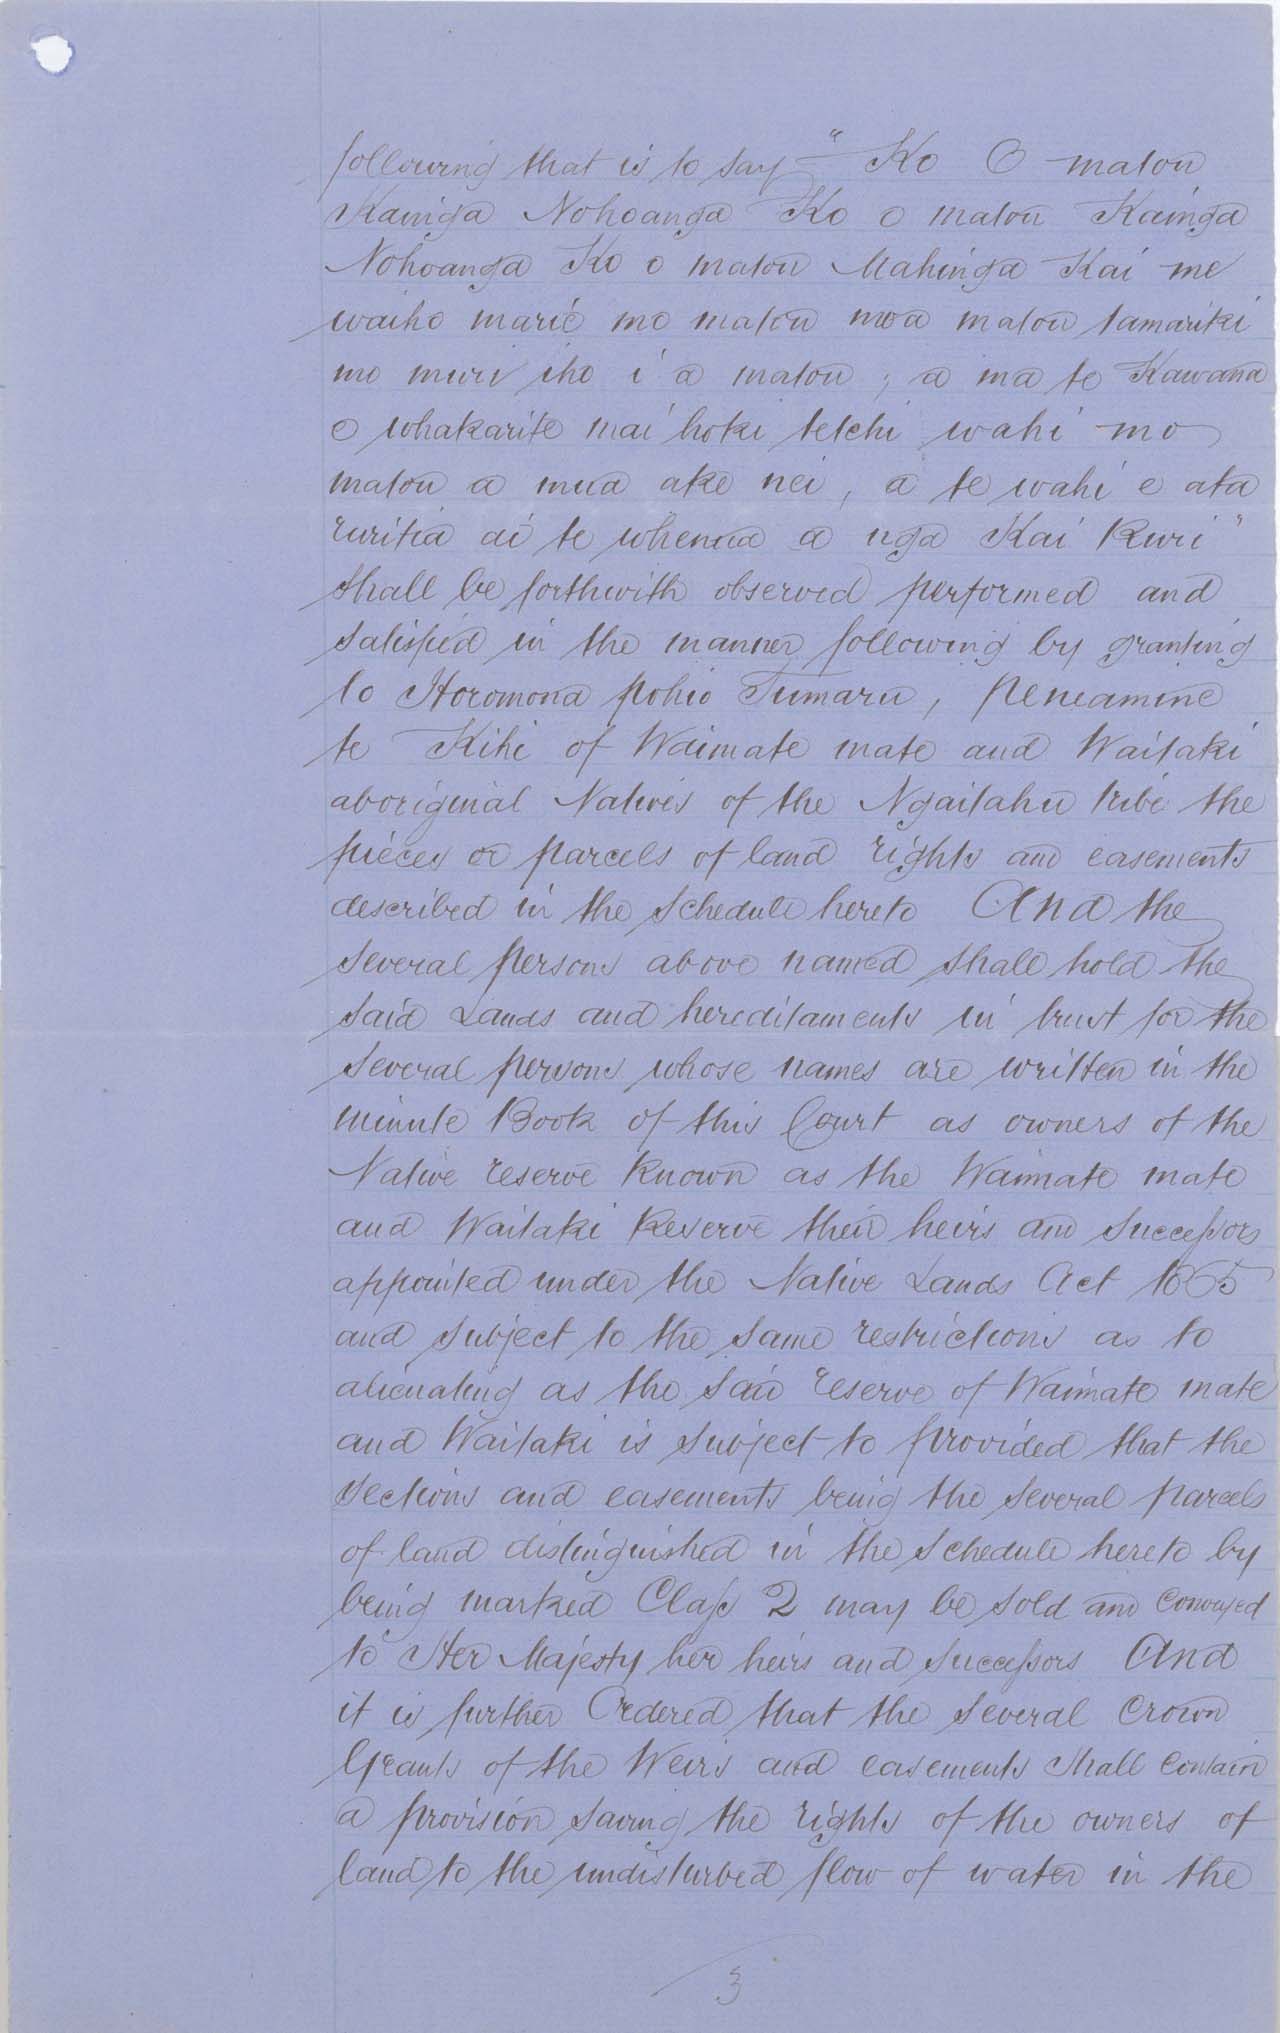 Descriptions - Sth Canterbury Native Land Court Reserves of 1868 - Page 3